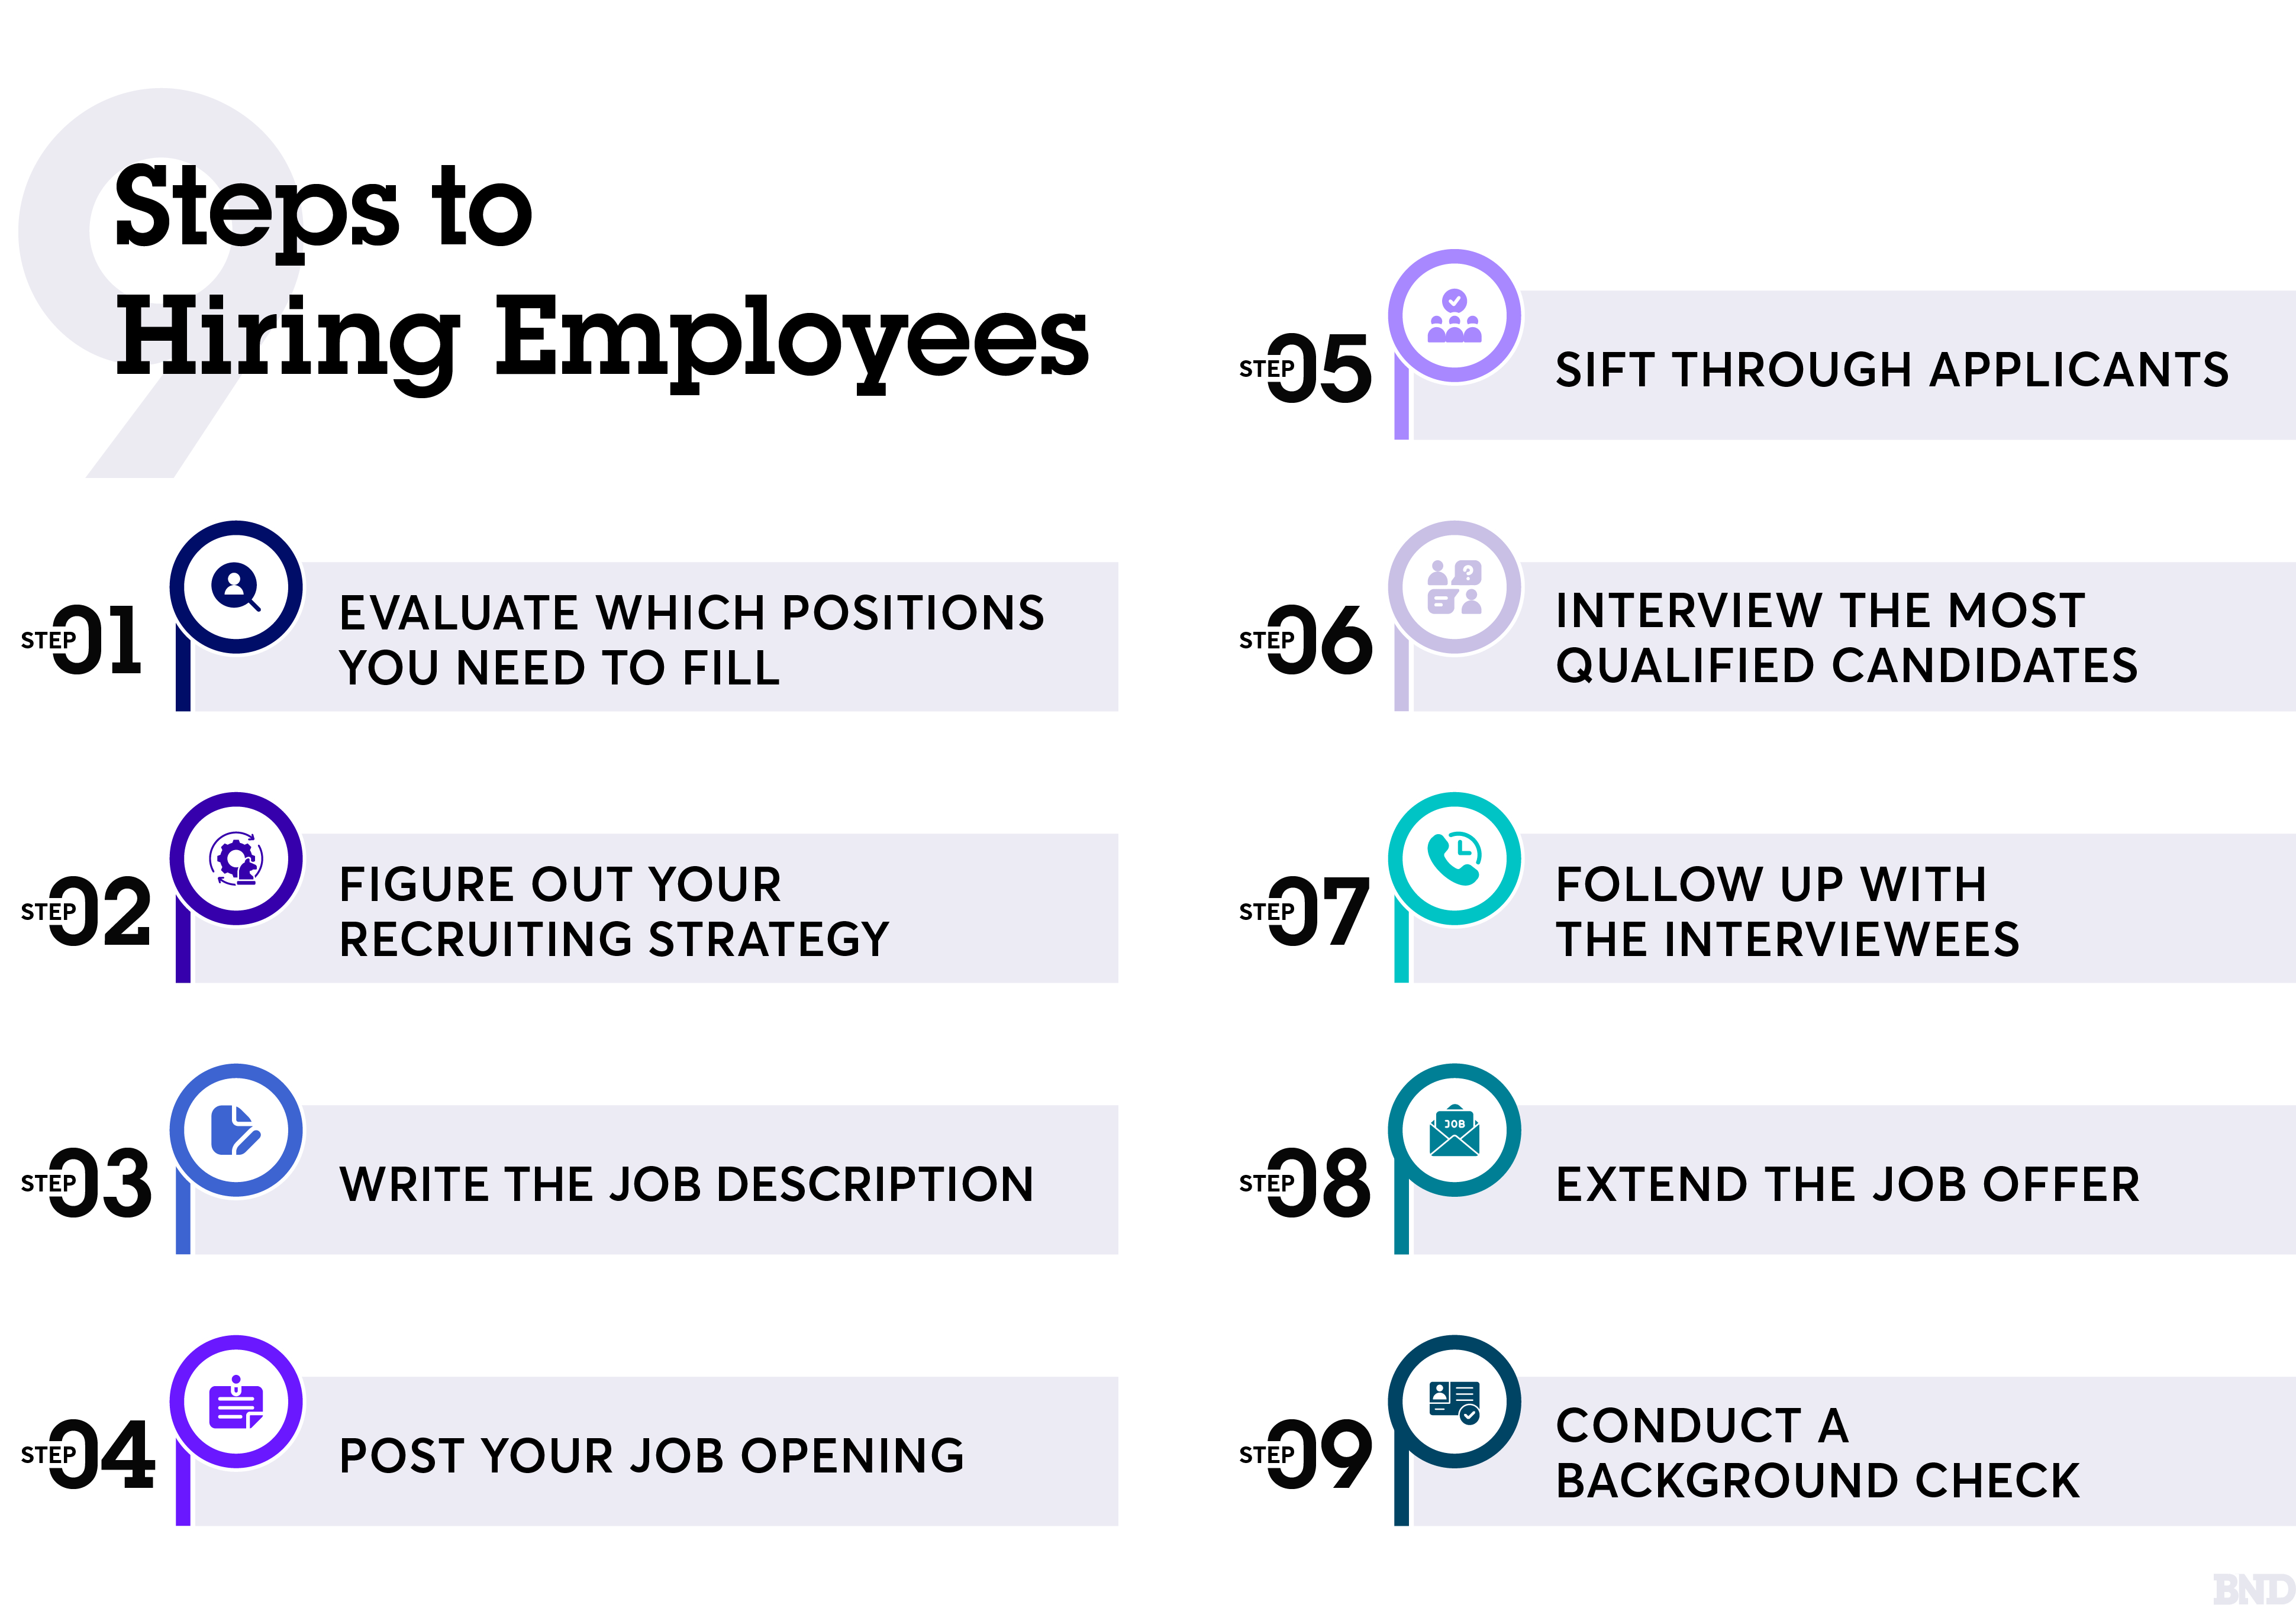 Infographic outlining 9 steps to hiring employees